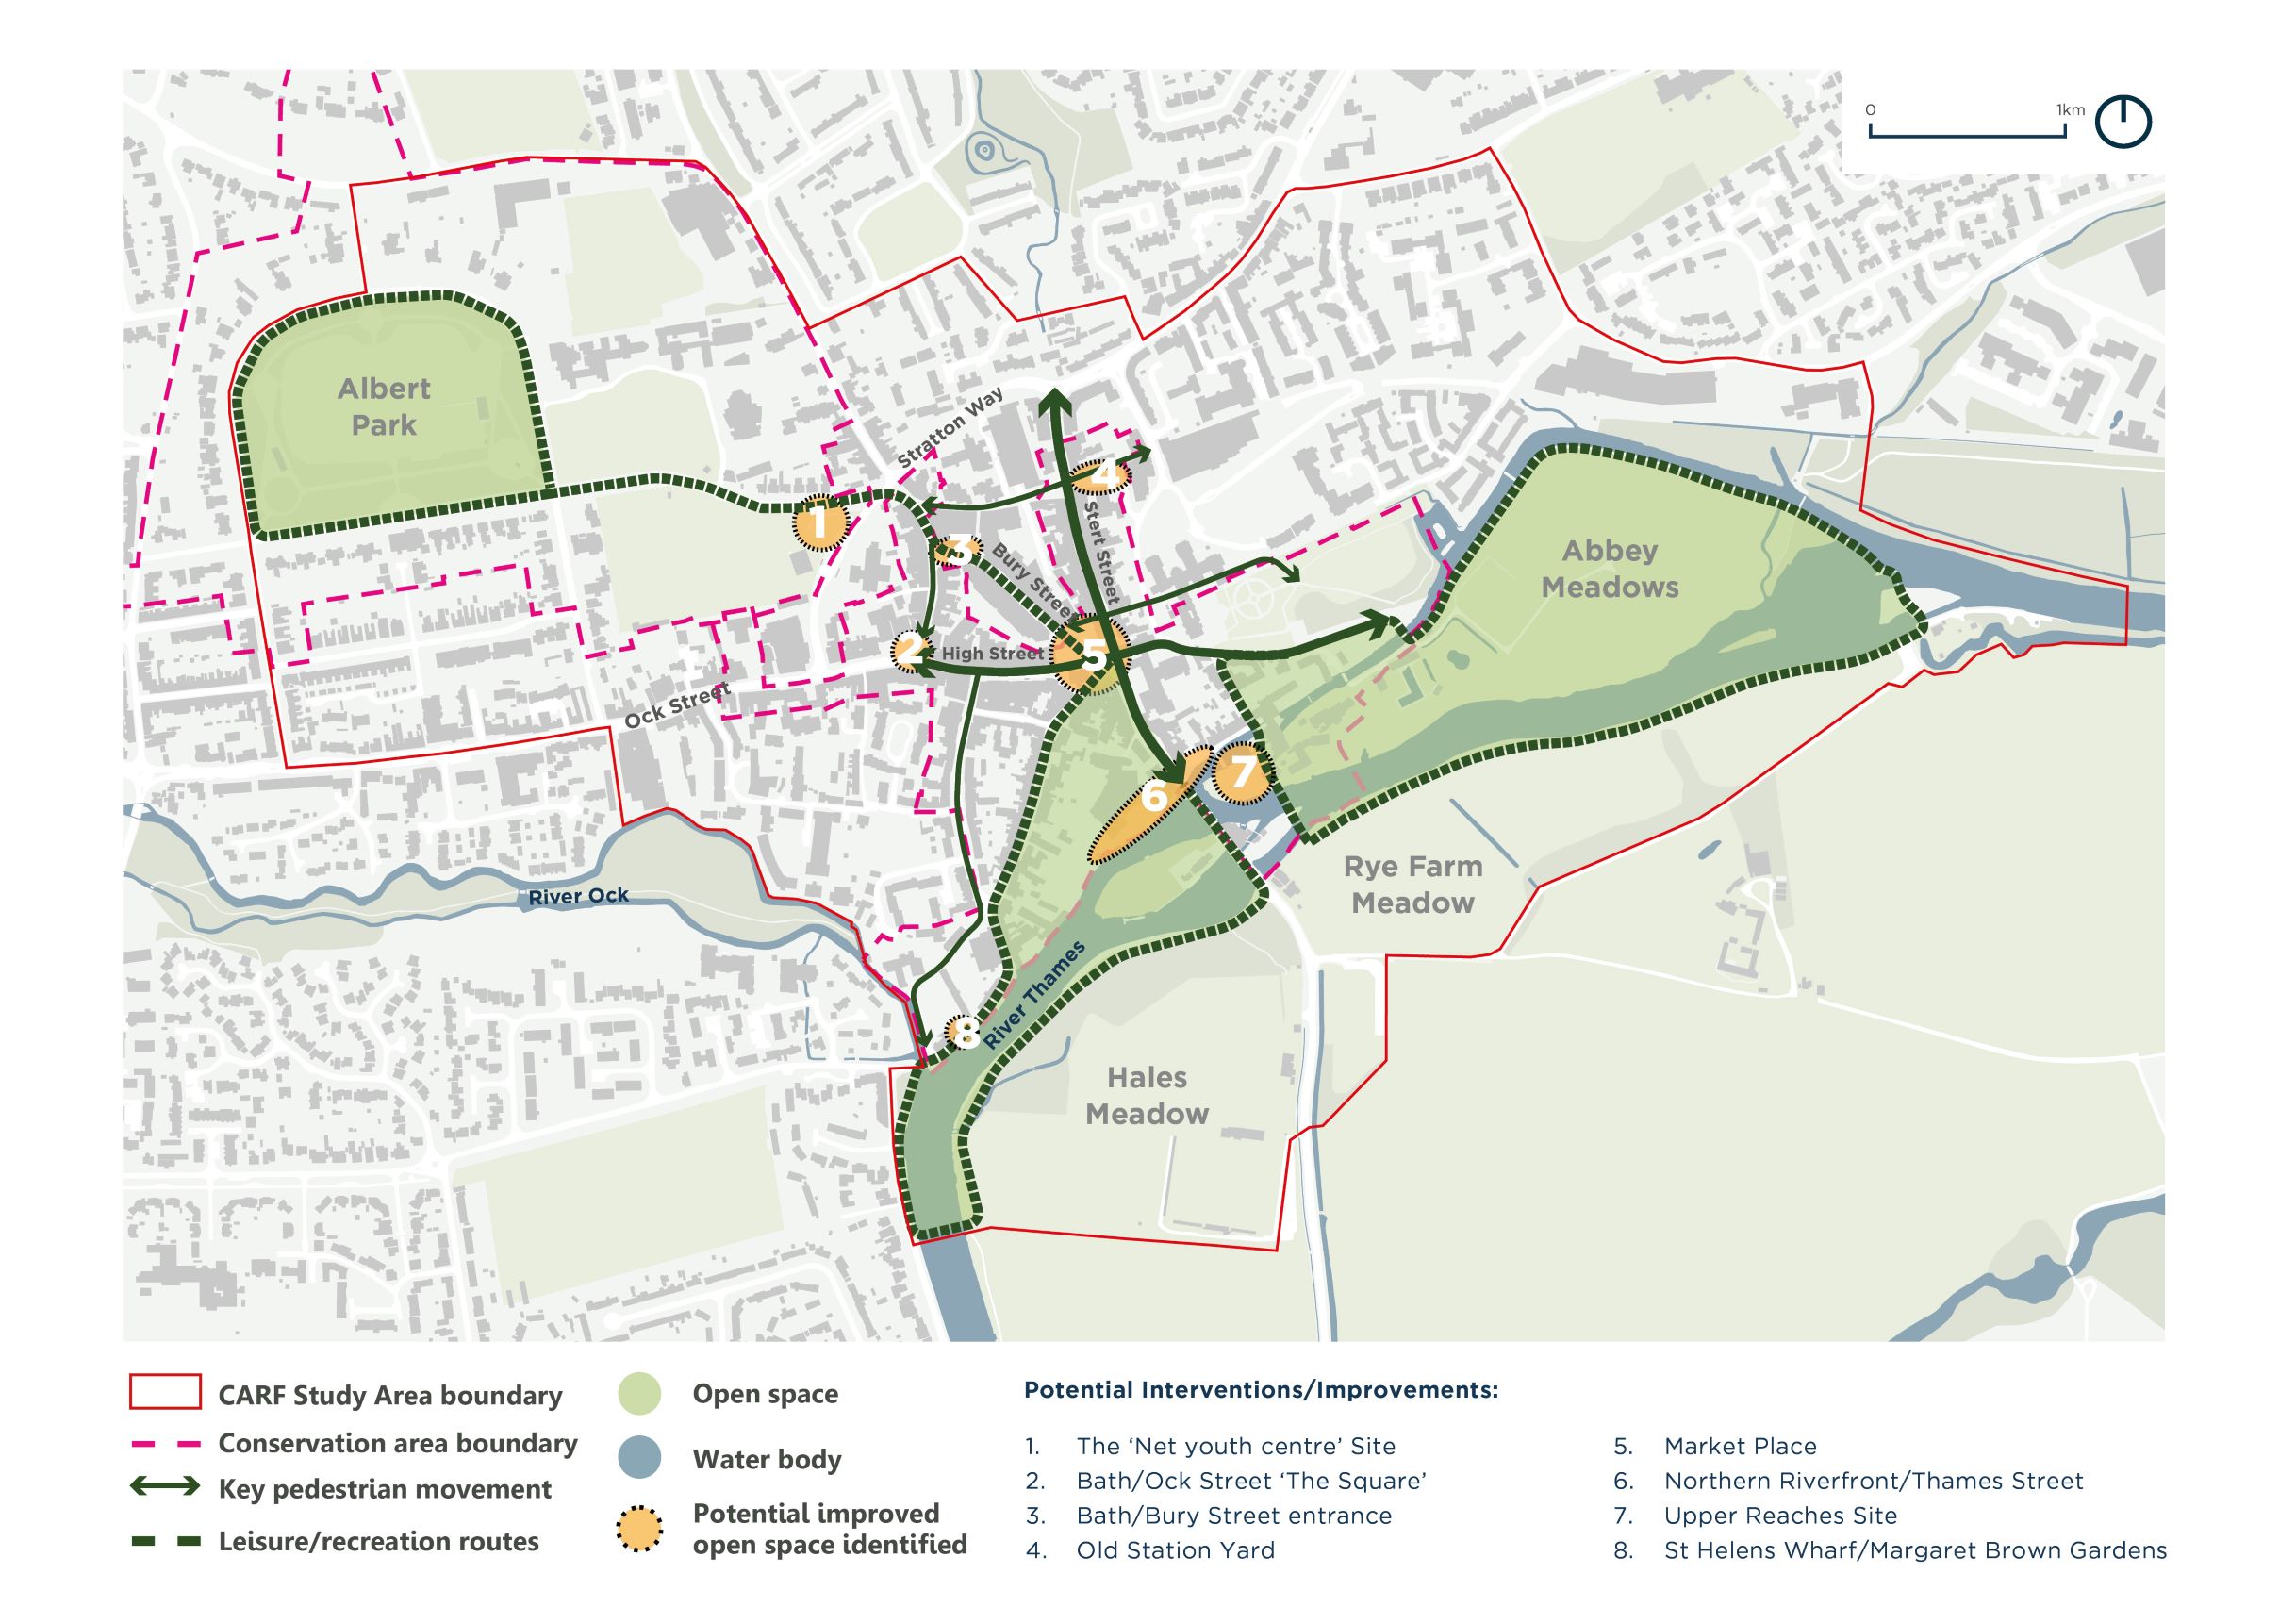 The plan highlights three leisure/walking routes that start from the Market Place. The first connects the town centre to Albert Park through improved public realm along Bury Street. The second begins at Market Place and heads south-west along East Saint Helen Street and loops back across a possible new bridge at Ferry Walk/Wilsham Road to connect to the Thames path along the south bank of the River Thames. The loop returns to Market Place along Bridge Street. The third leisure loop could improve existing walk around Abbey Meadows with potential for a new pedestrian river crossing at the Upper Reaches site, connecting back to Abbey Close. The plan also highlights new or existing open spaces that have the potential to be improved for a better public realm experience. These sites include: 1. The Net Youth Centre site, 2. ‘The Square’ at Bath/Ock Street, 3. Bath/Bury Street entrance, 4. Old Station Yard, 5. Abingdon Town Square/Market Place, 6. Northern Riverfront/Thames Street, 7. Upper Reaches Site, 8. St Helens Wharf/Margaret Brown Gardens.